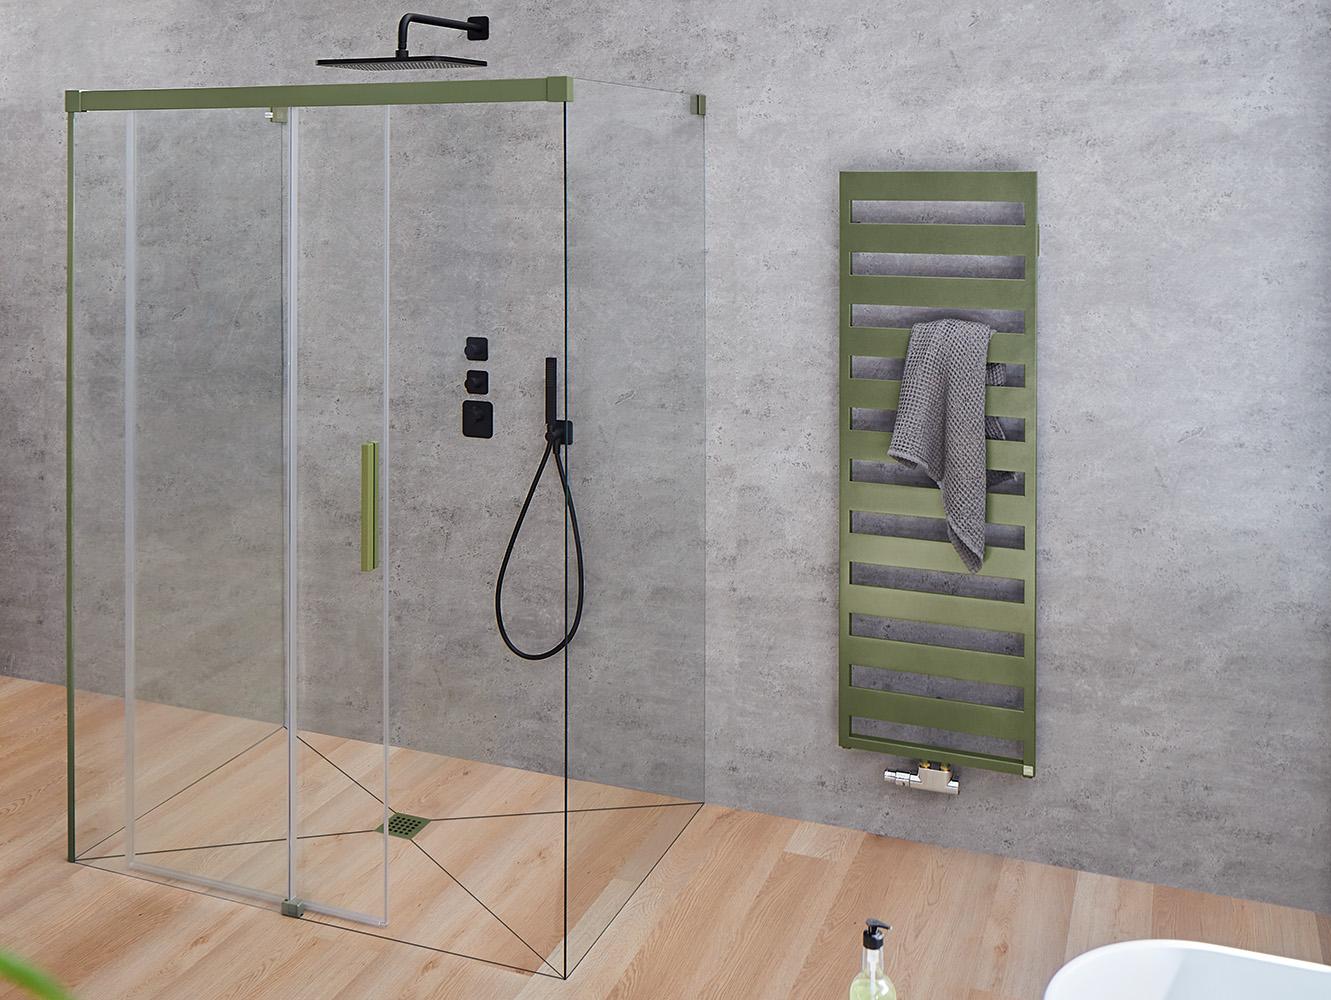 Kermi profile shower enclosure NICA off-floor two-part sliding door with fixed panel and side wall without wall profile in Forest